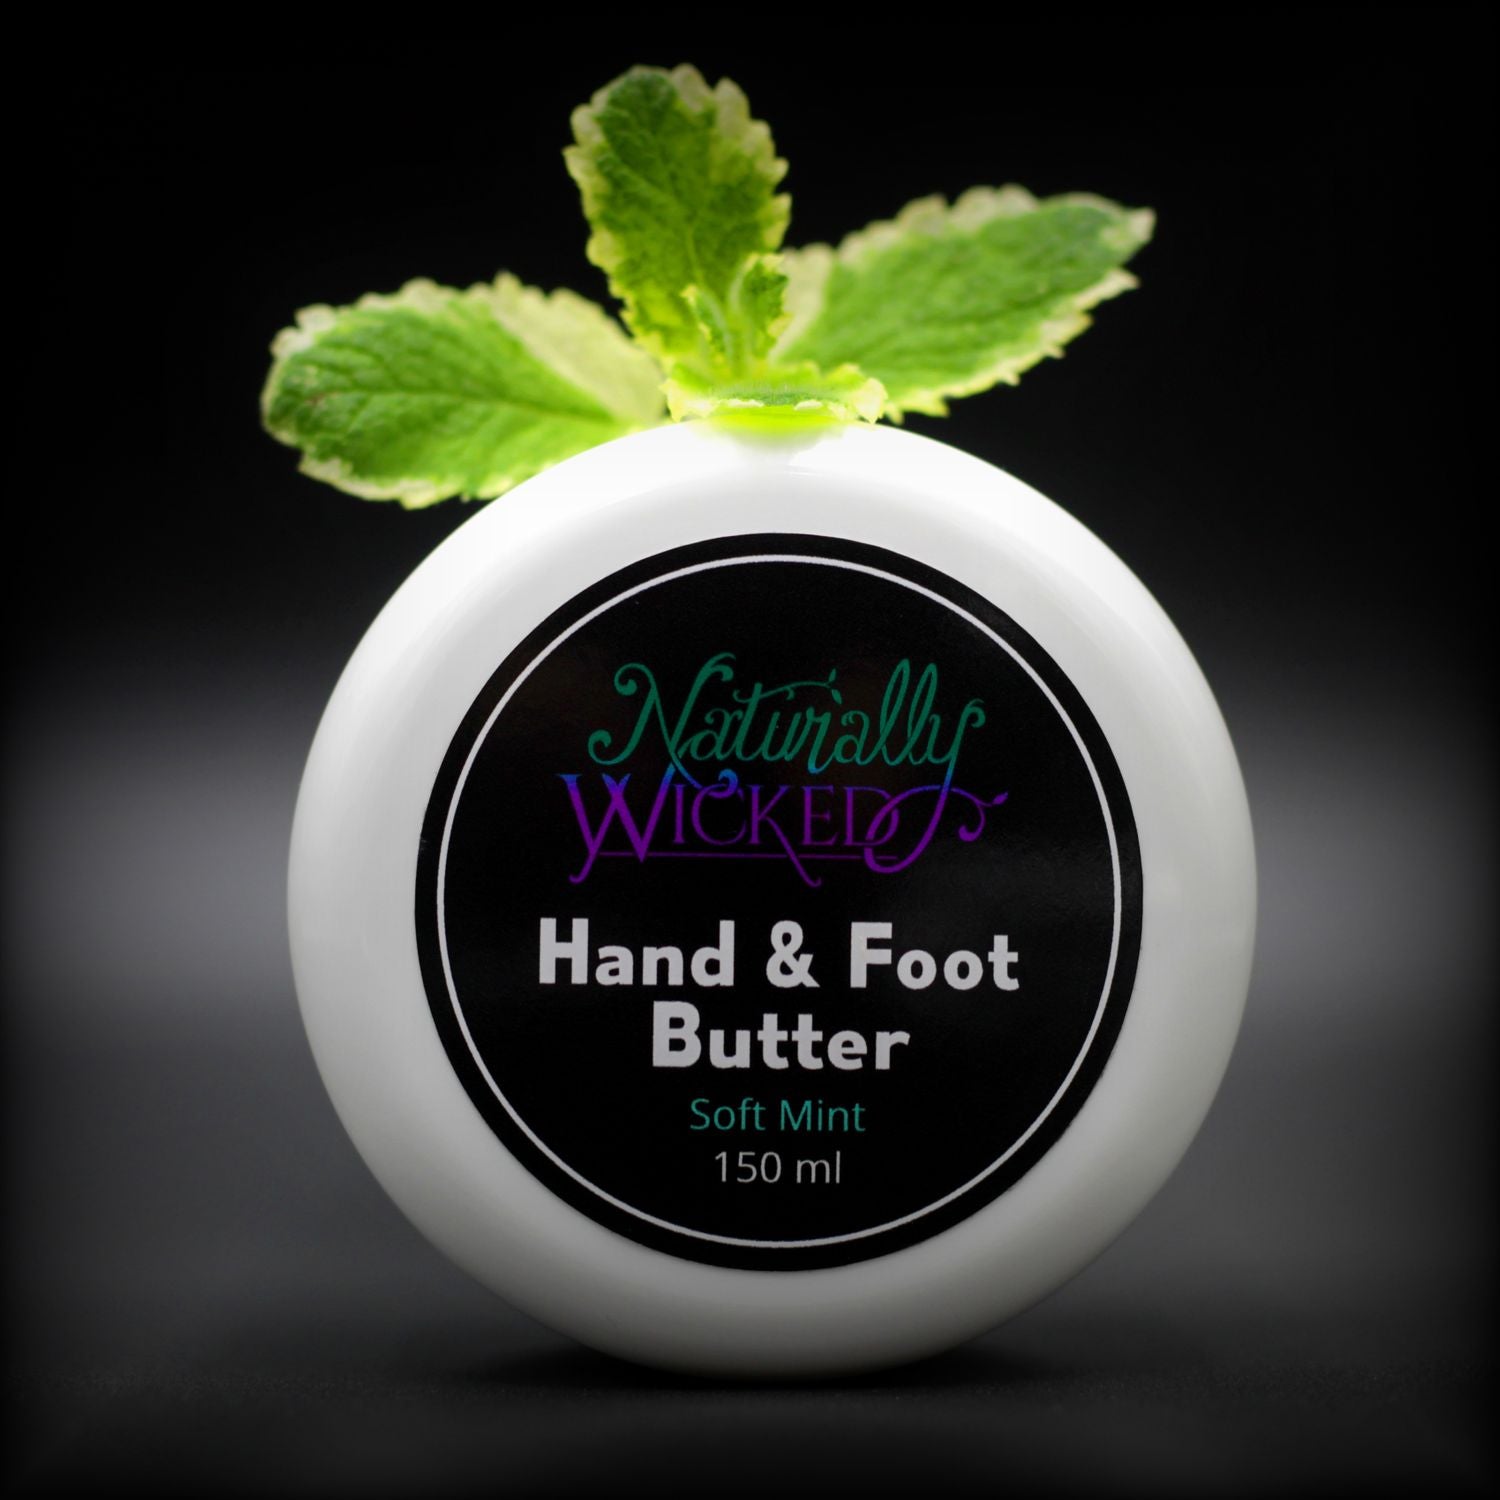 Naturally Wicked Moisturising Soft Mint Hand & Foot Repairing Butter With Refreshing Mint Leaves On Top